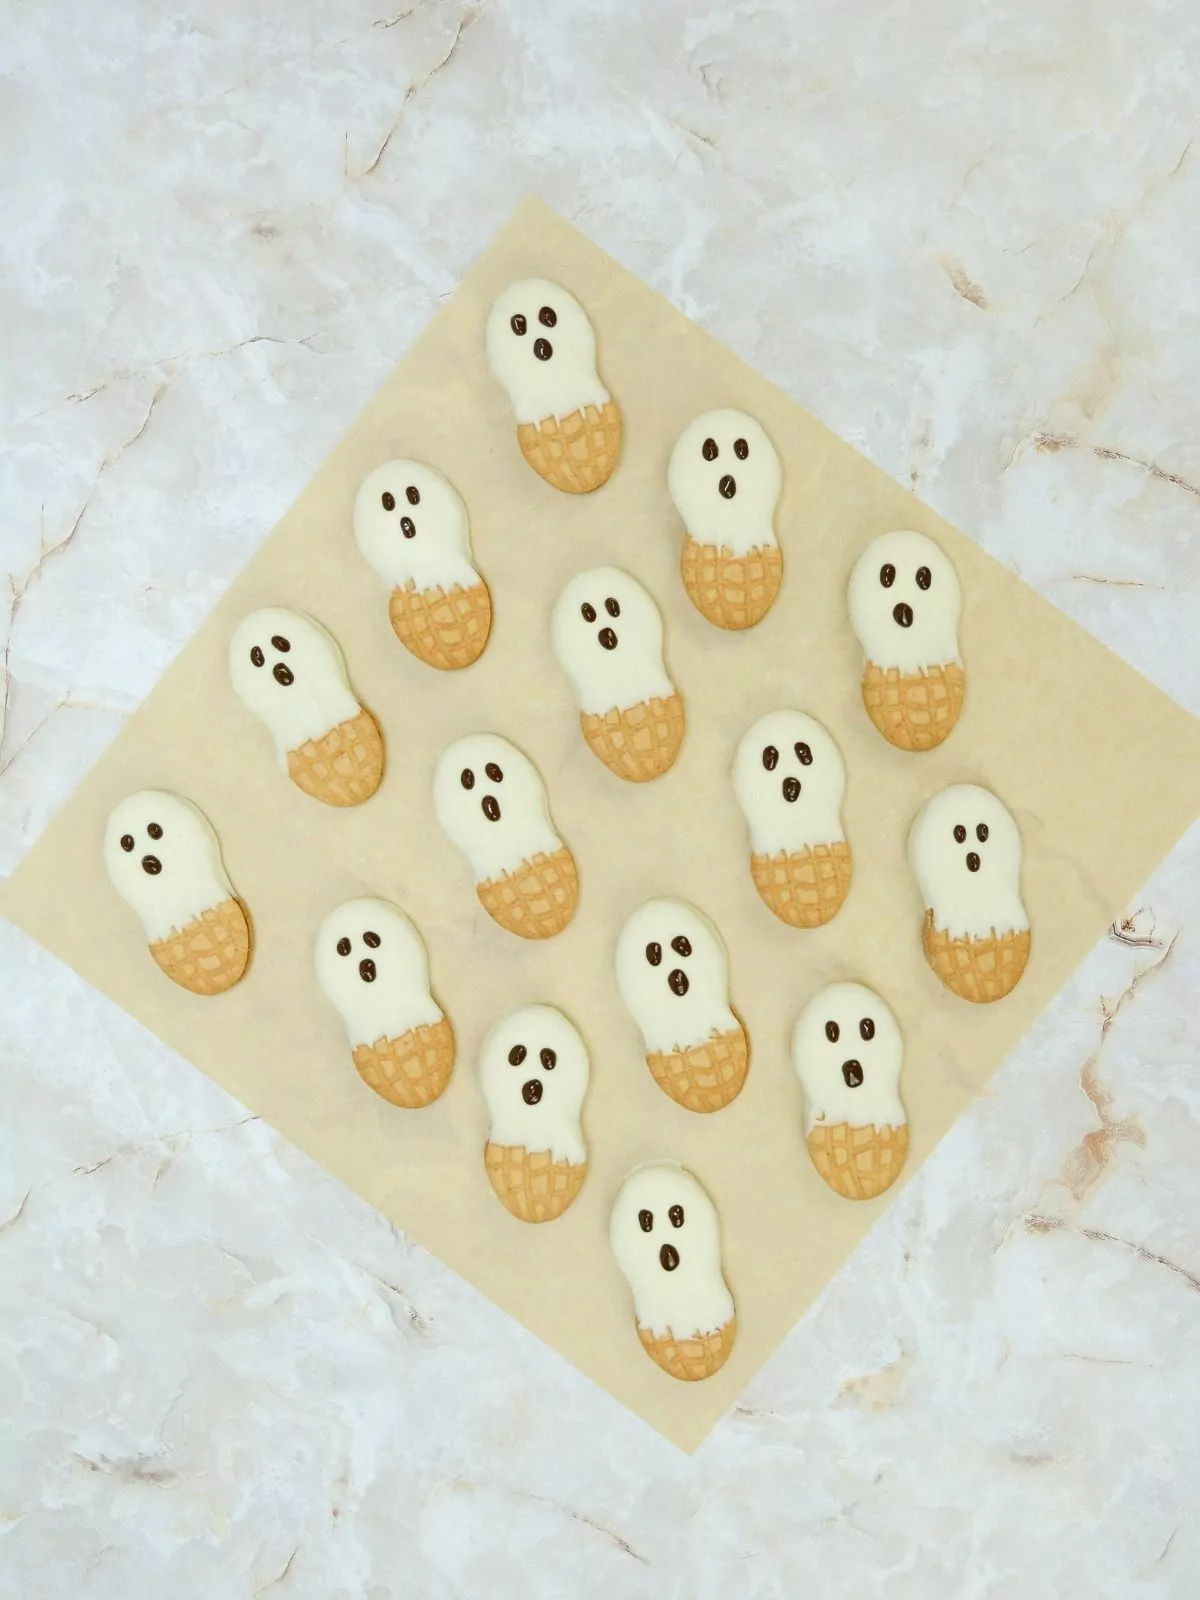 Nutter Butter cookies decorated as ghosts.